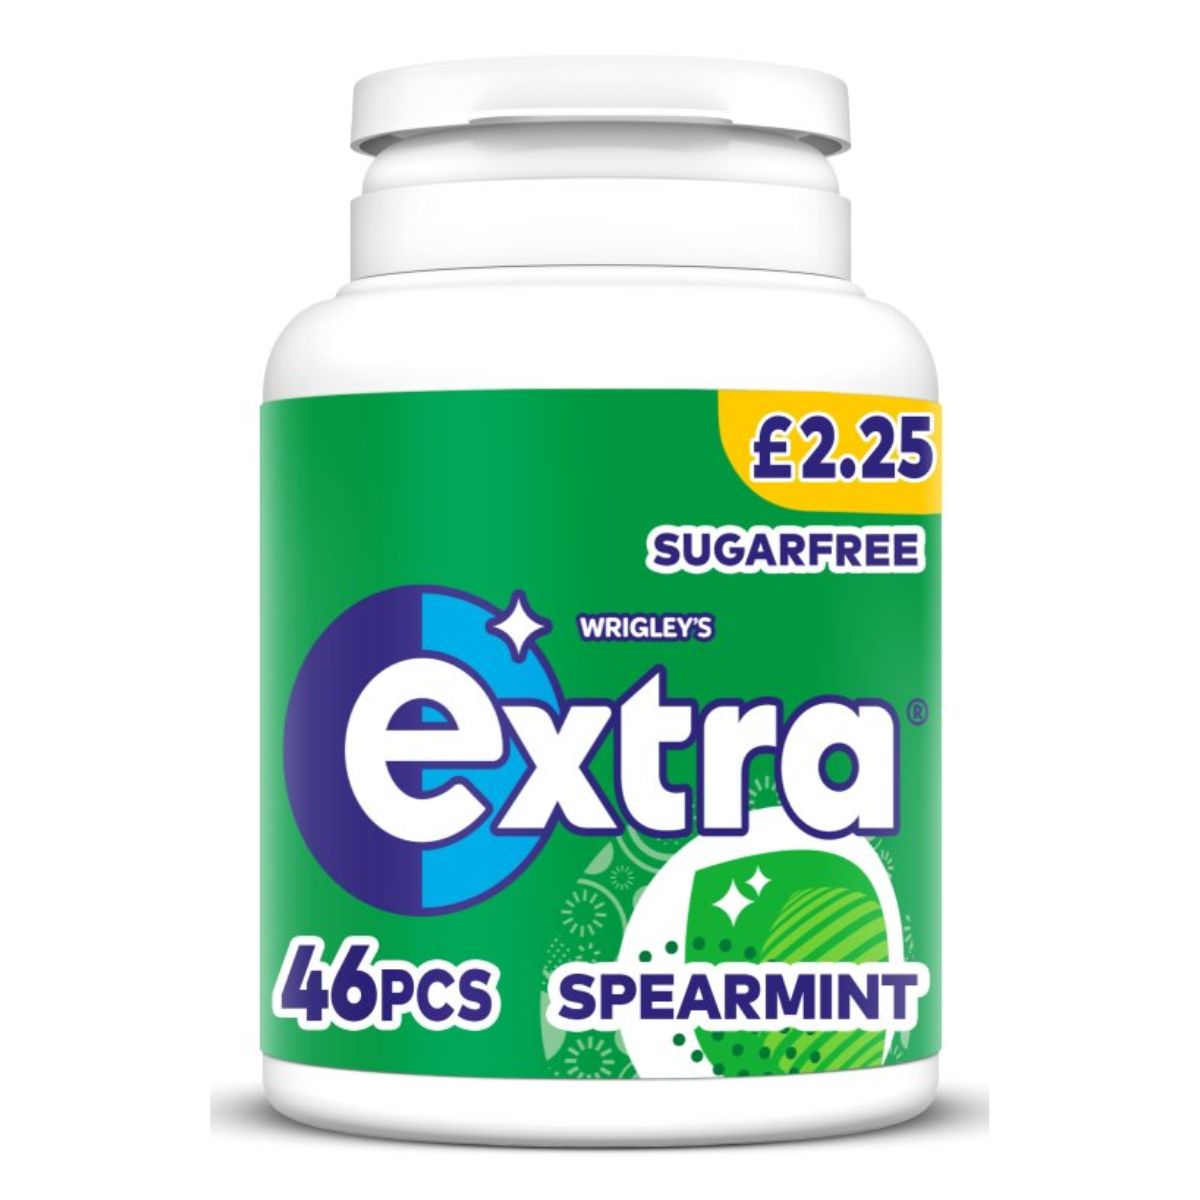 Extra-Spearmint Sugarfree Chewing Gum Bottles - 46pcs with spearmint.